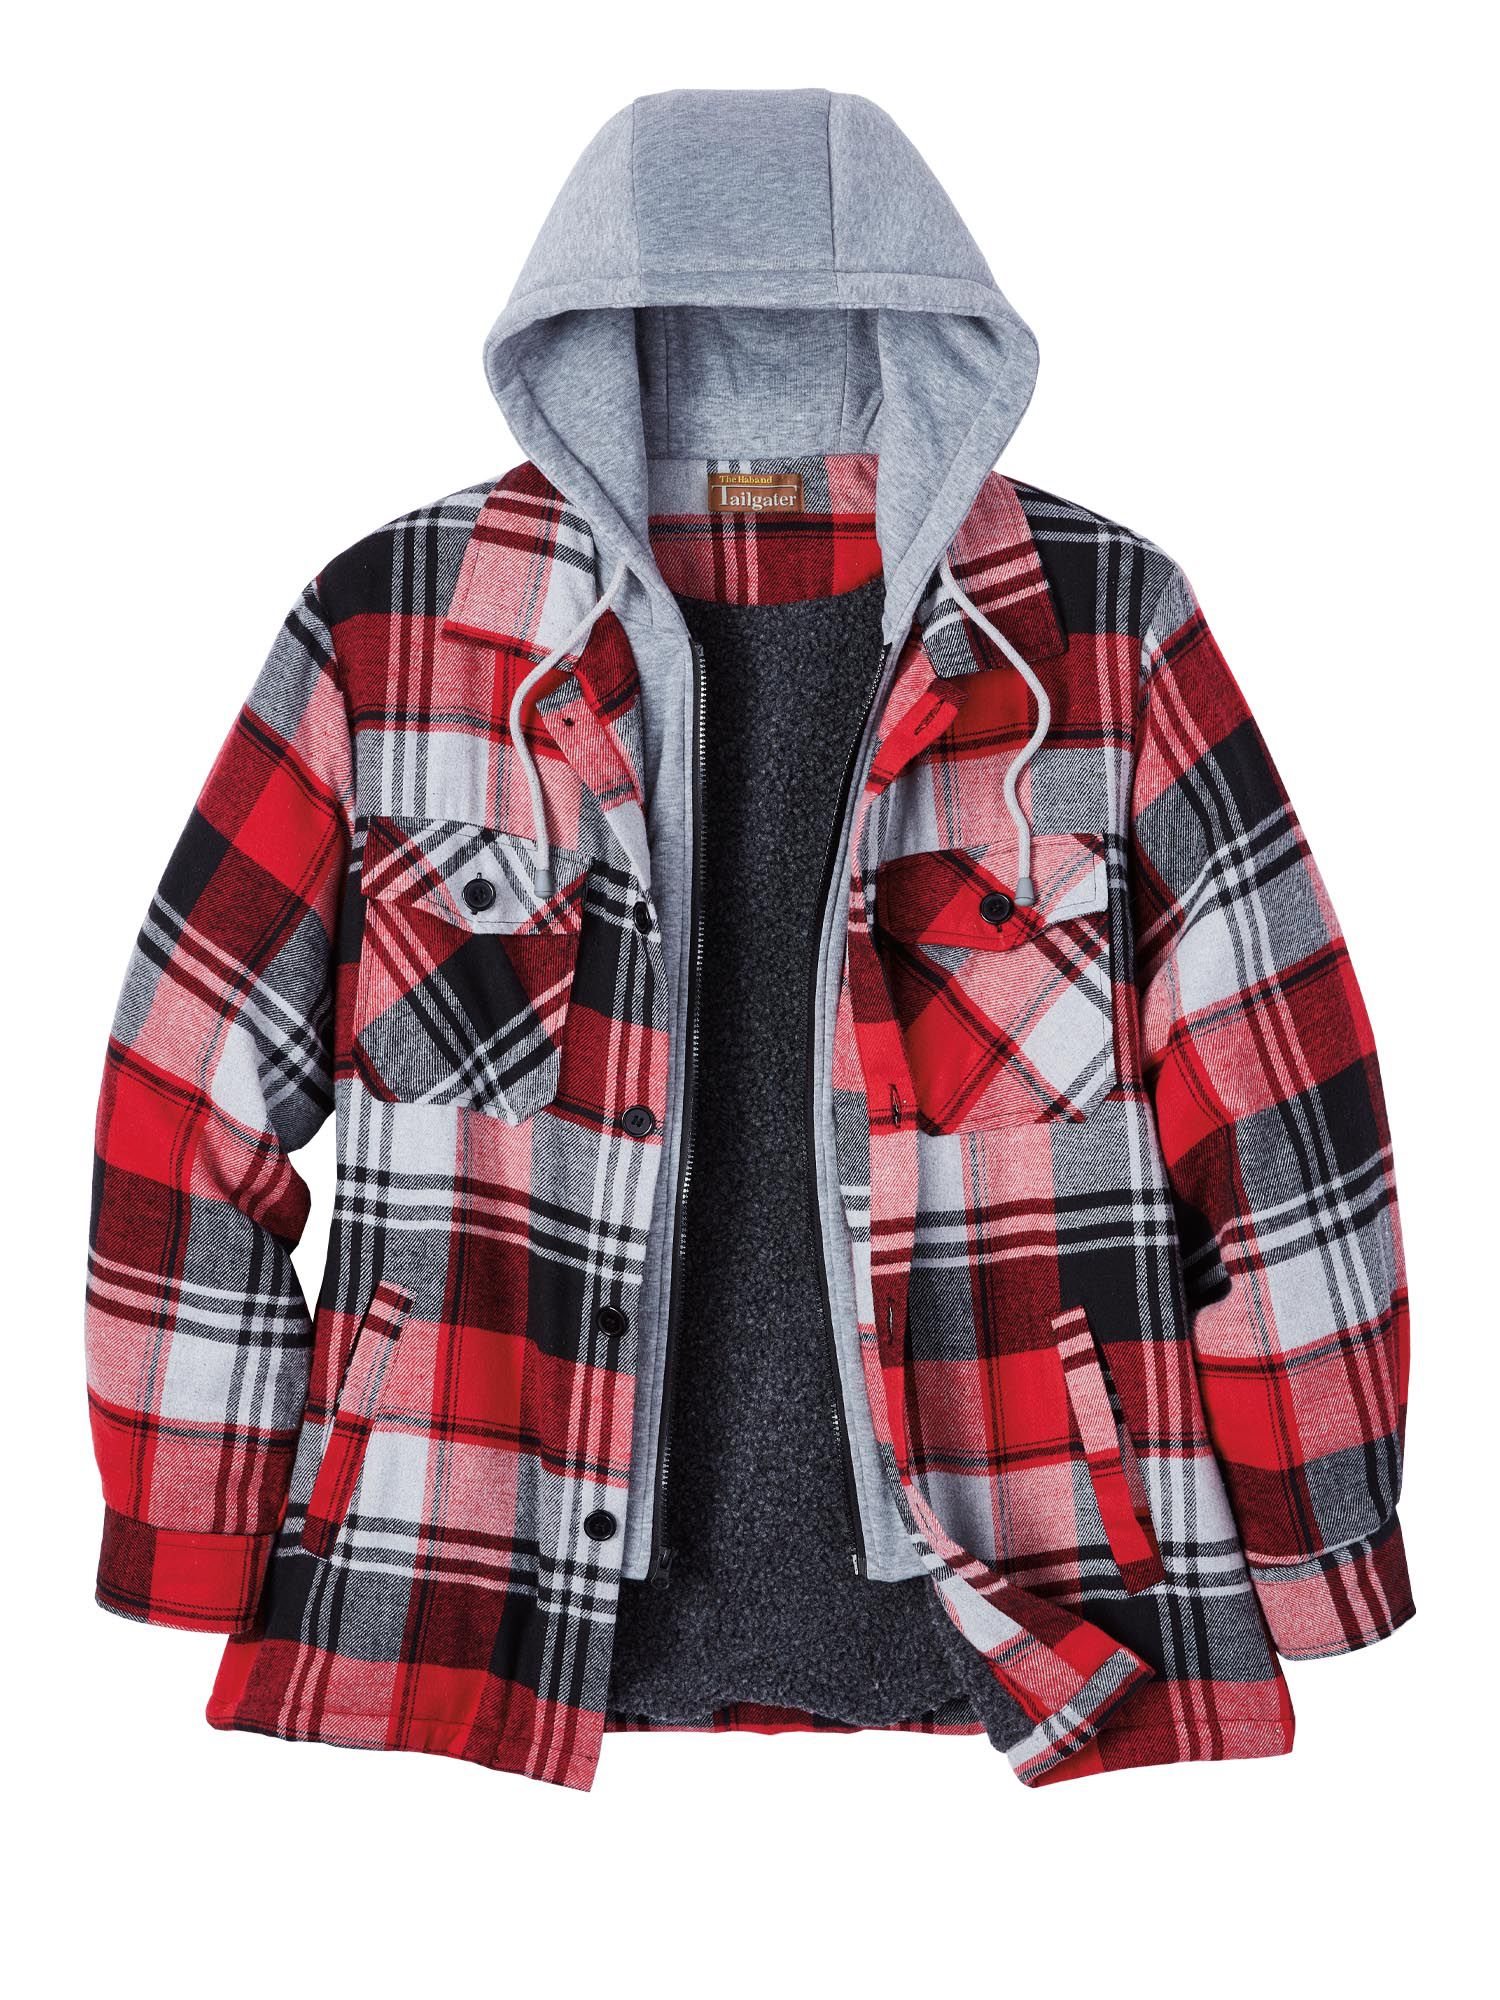 supreme Shearling Lined Flannel Shirt M - thebikeculture.com